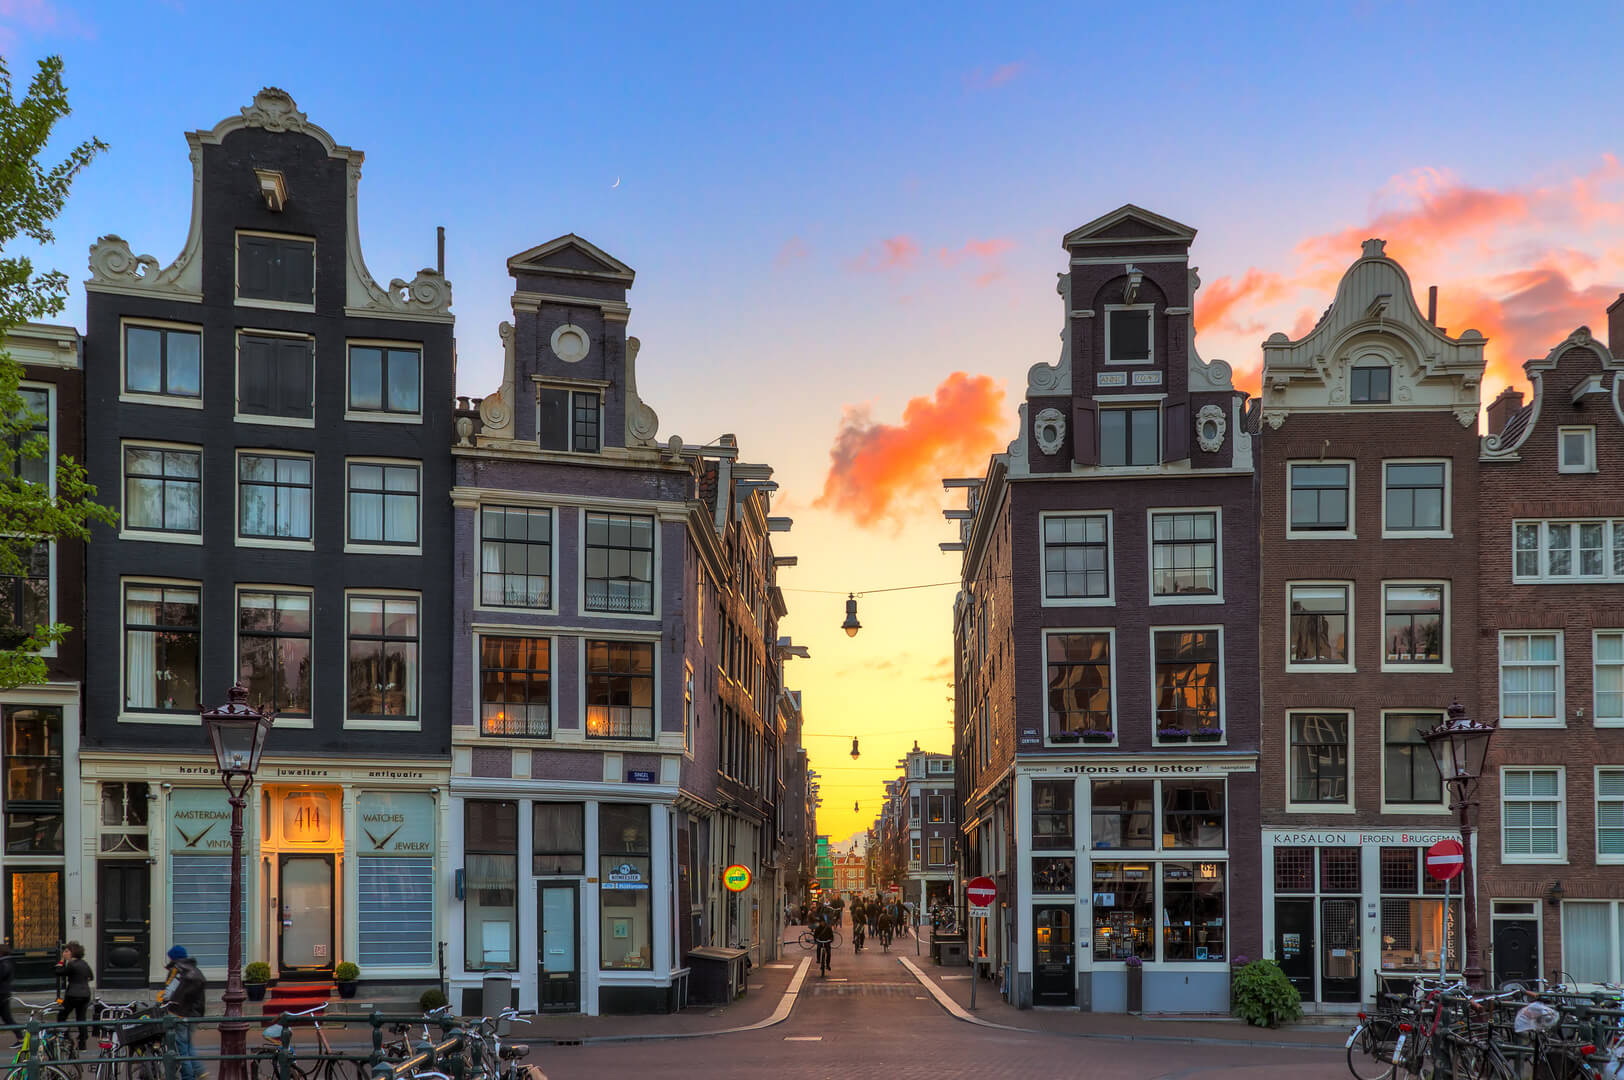 Beautiful sunset at one of nine little streets, a popular touristic destination in Amsterdam, The Netherlands